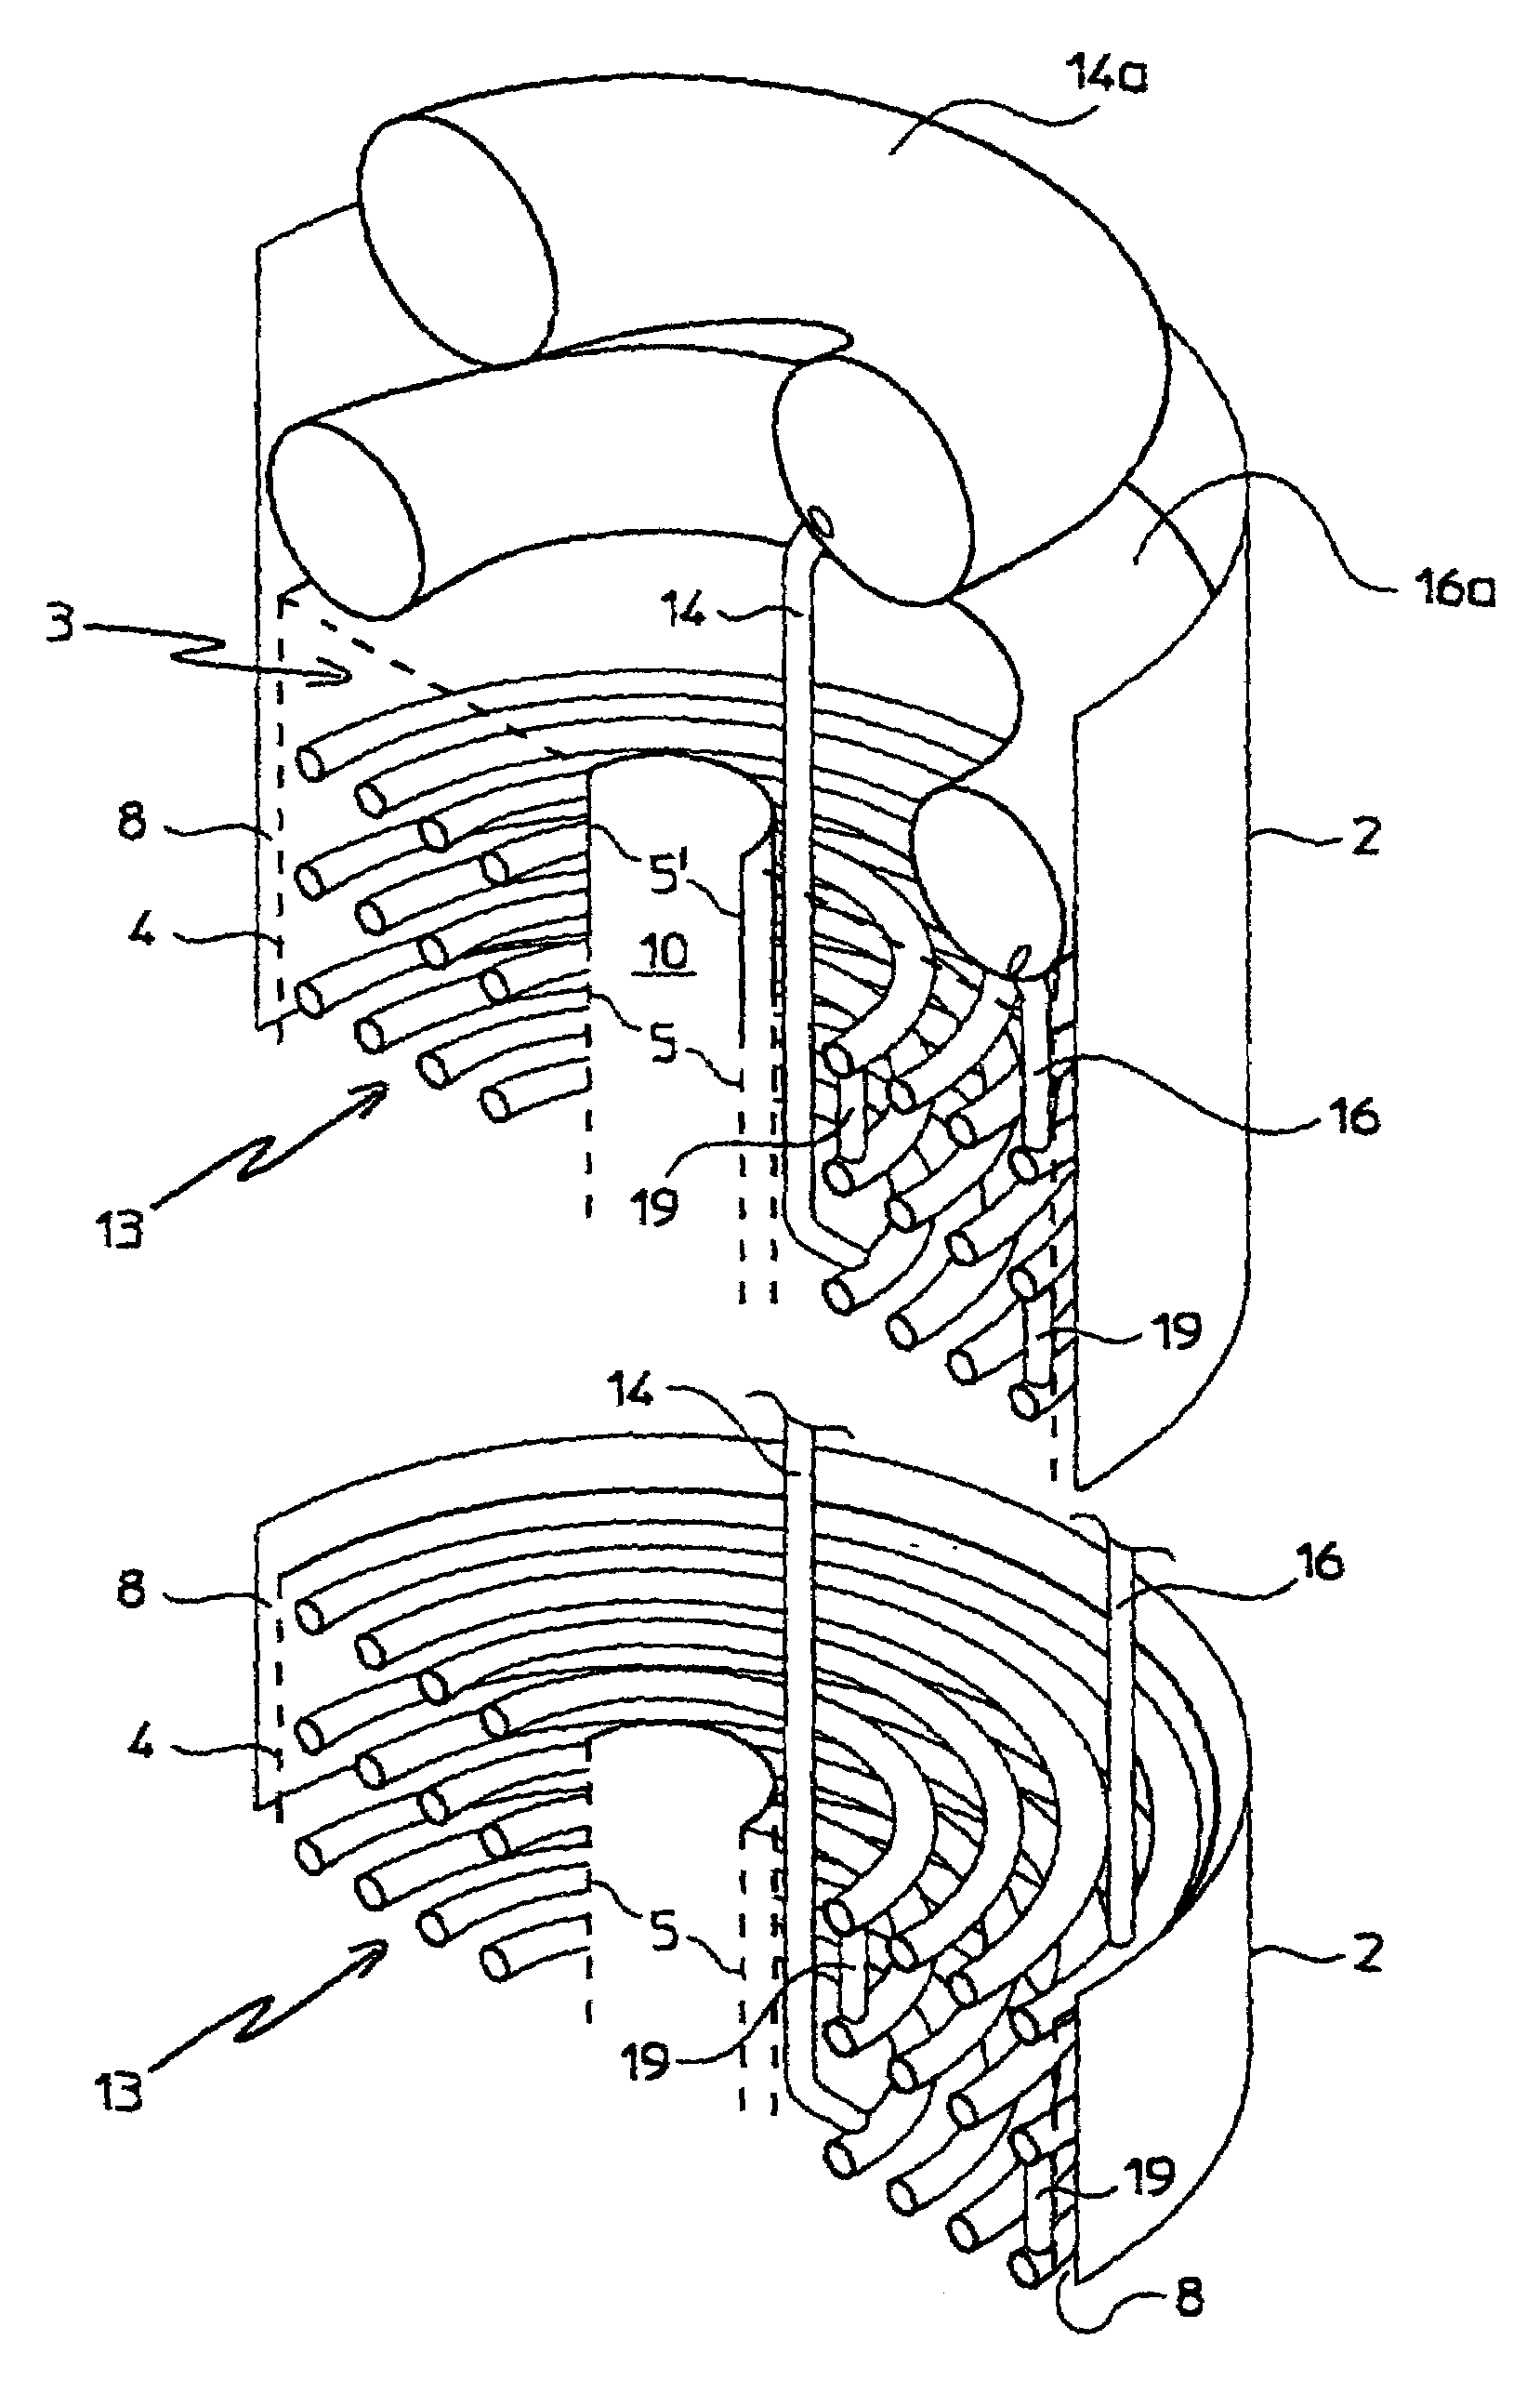 Isothermal reactor for exothermic or endothermic heterogeneous reactions